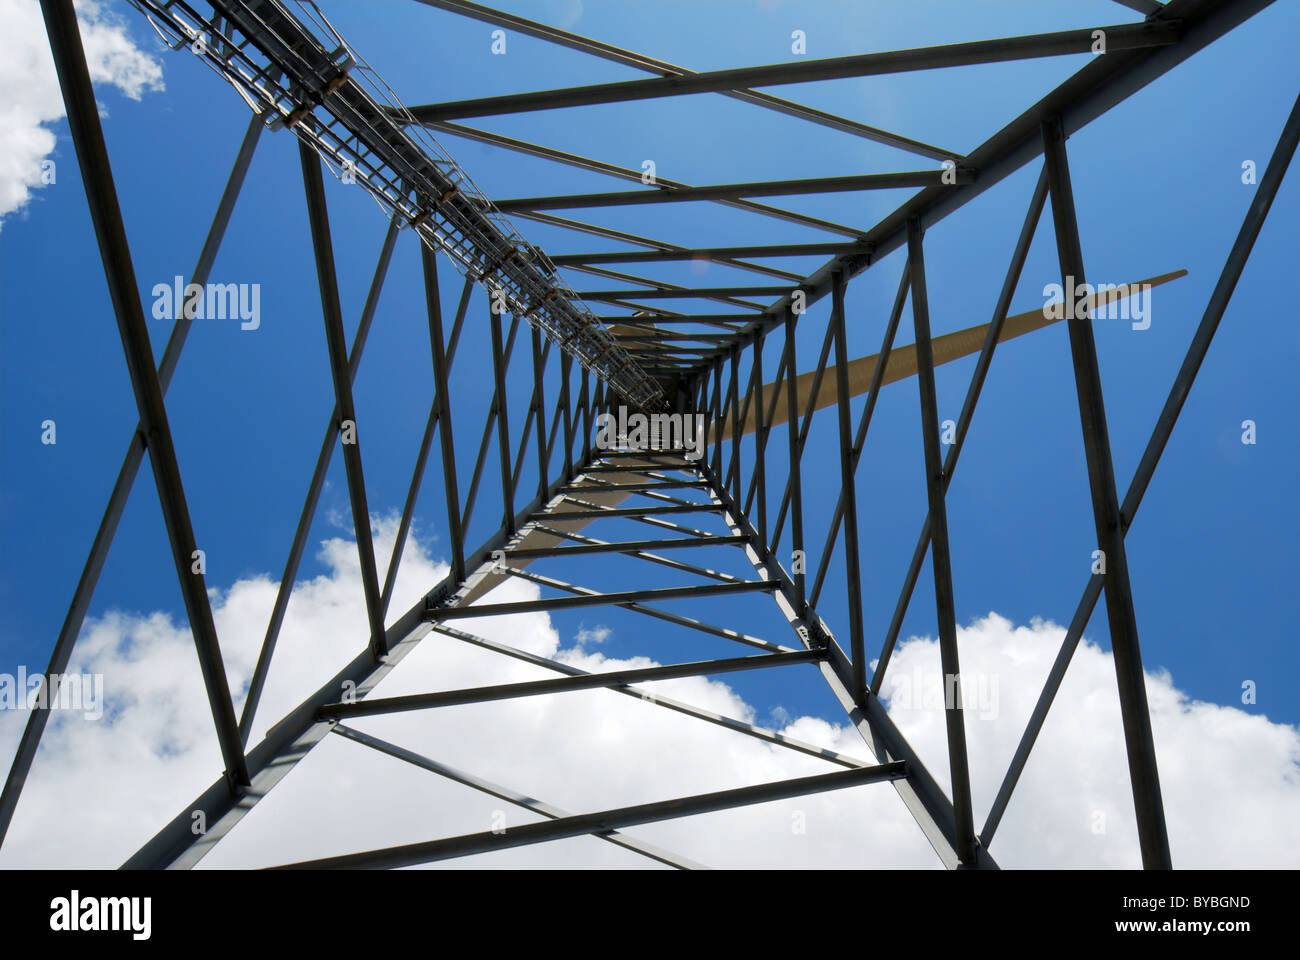 Wind turbine trellis viewed from bottom against blue and white sky Stock Photo